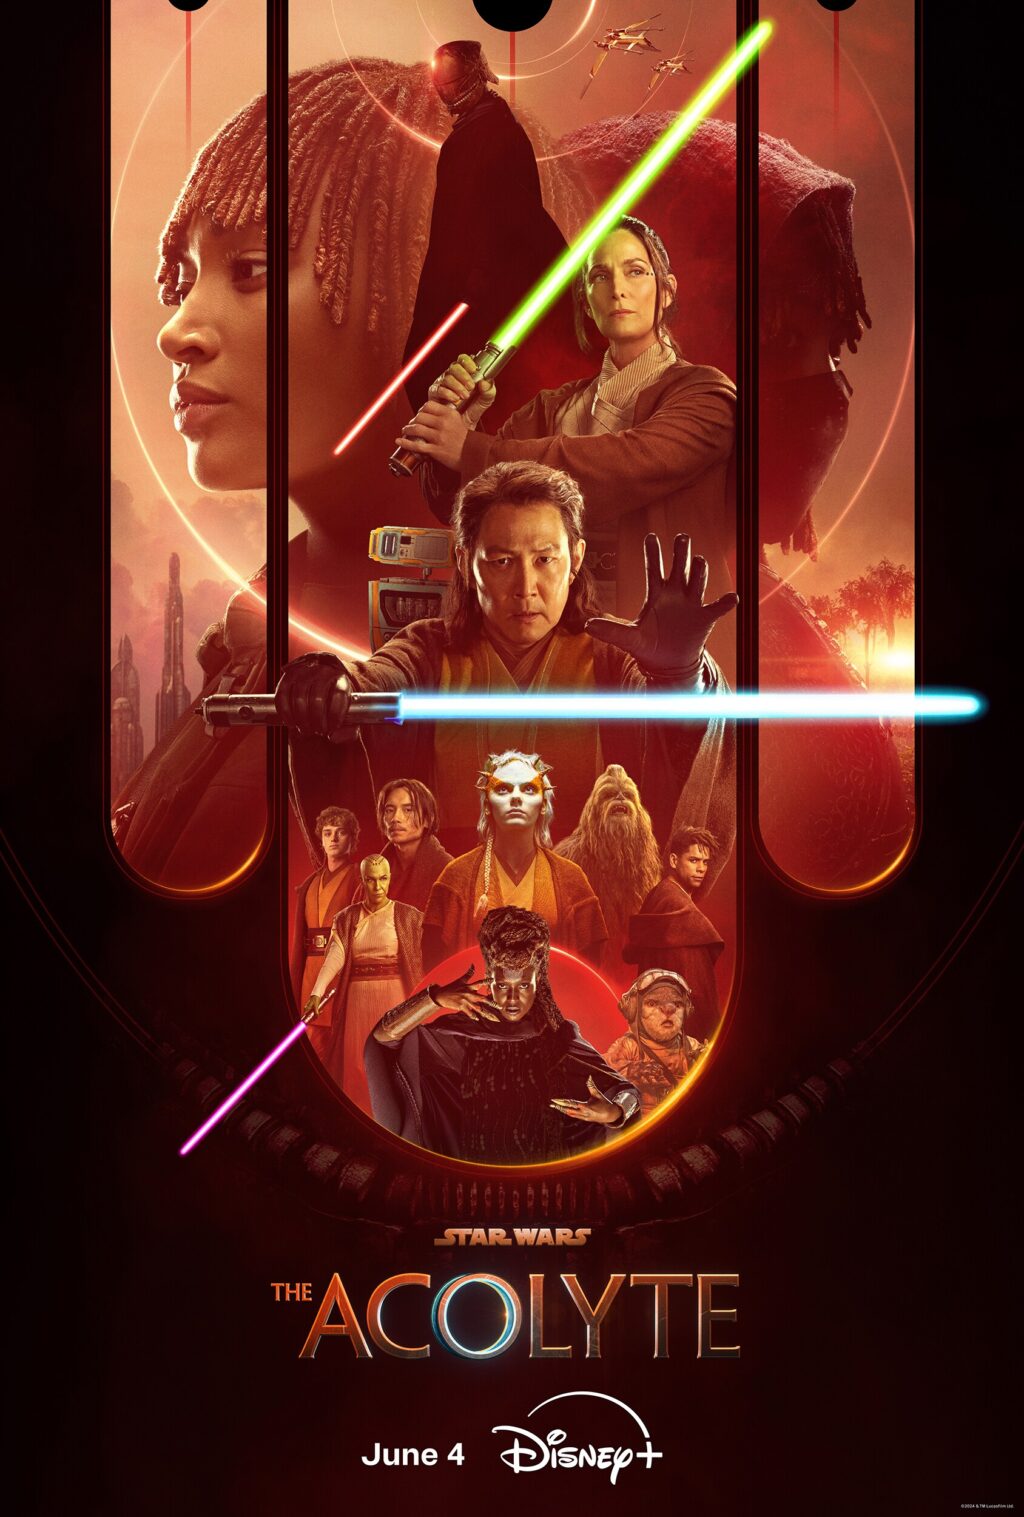 Star Wars: The Acolyte (Season 1 Poster)